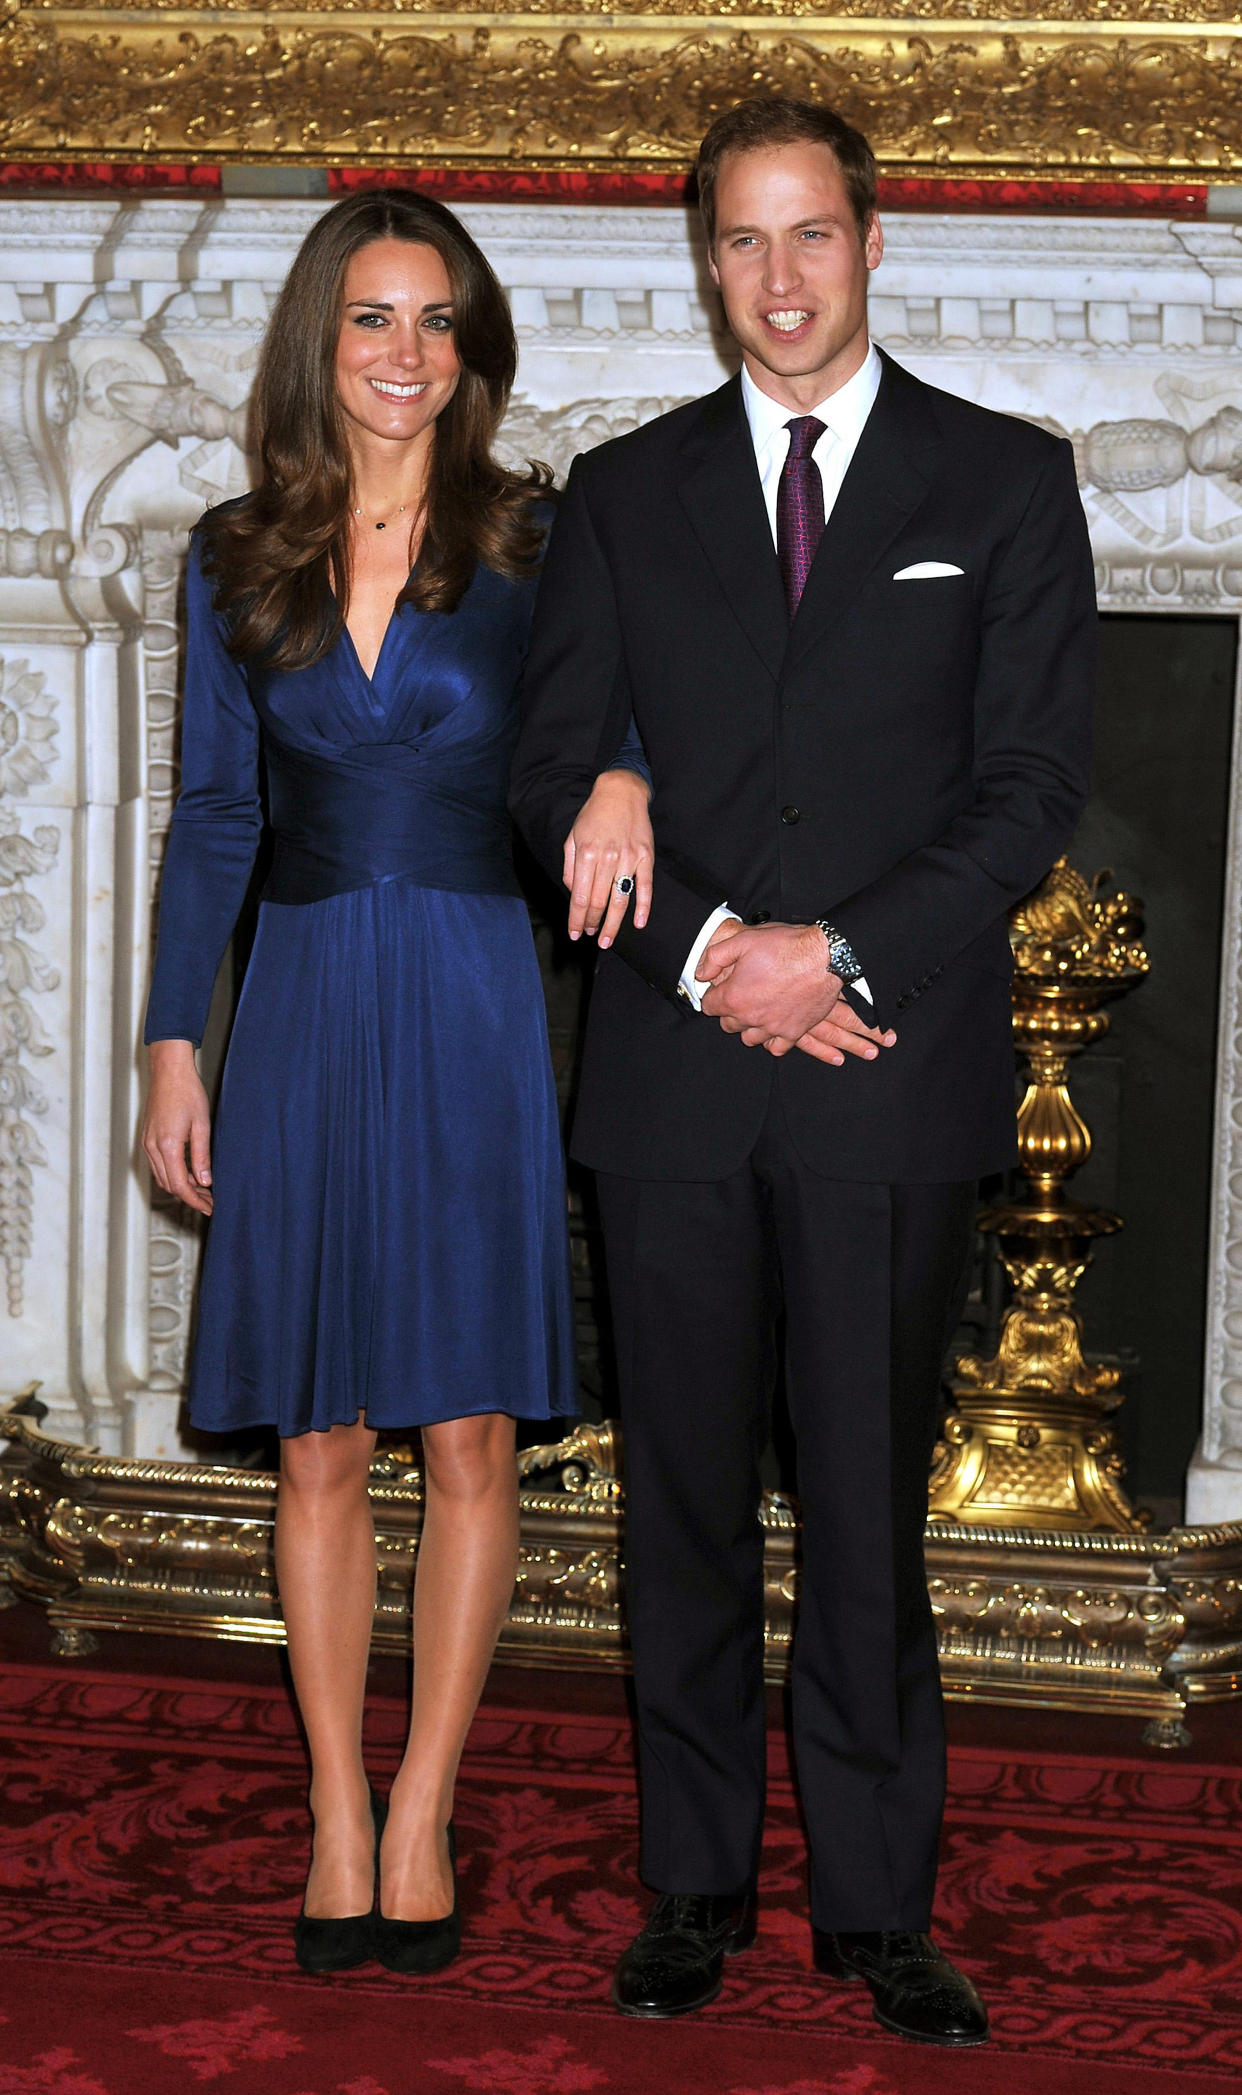 Royal engagement (John Stillwell / PA Images via Getty Images)